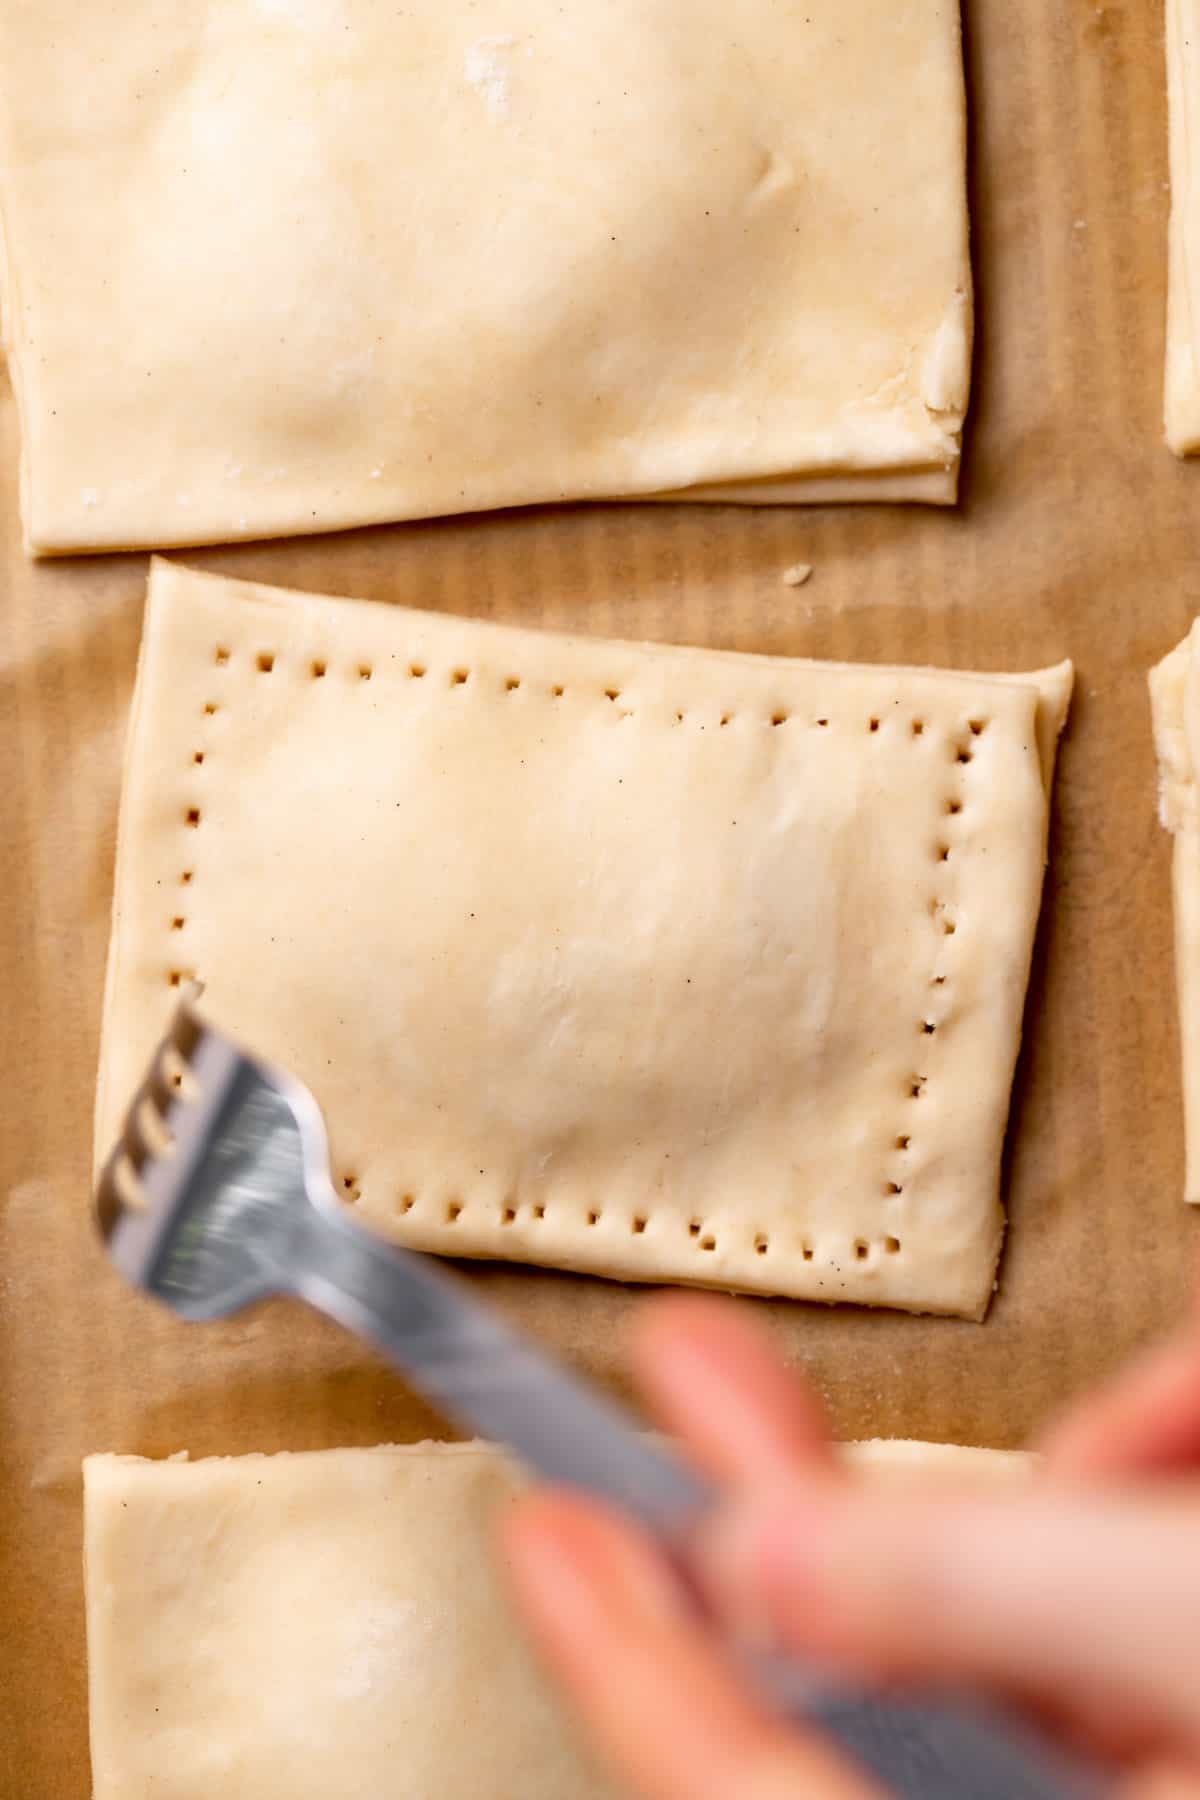 a fork crimping the edges of the pop tarts.